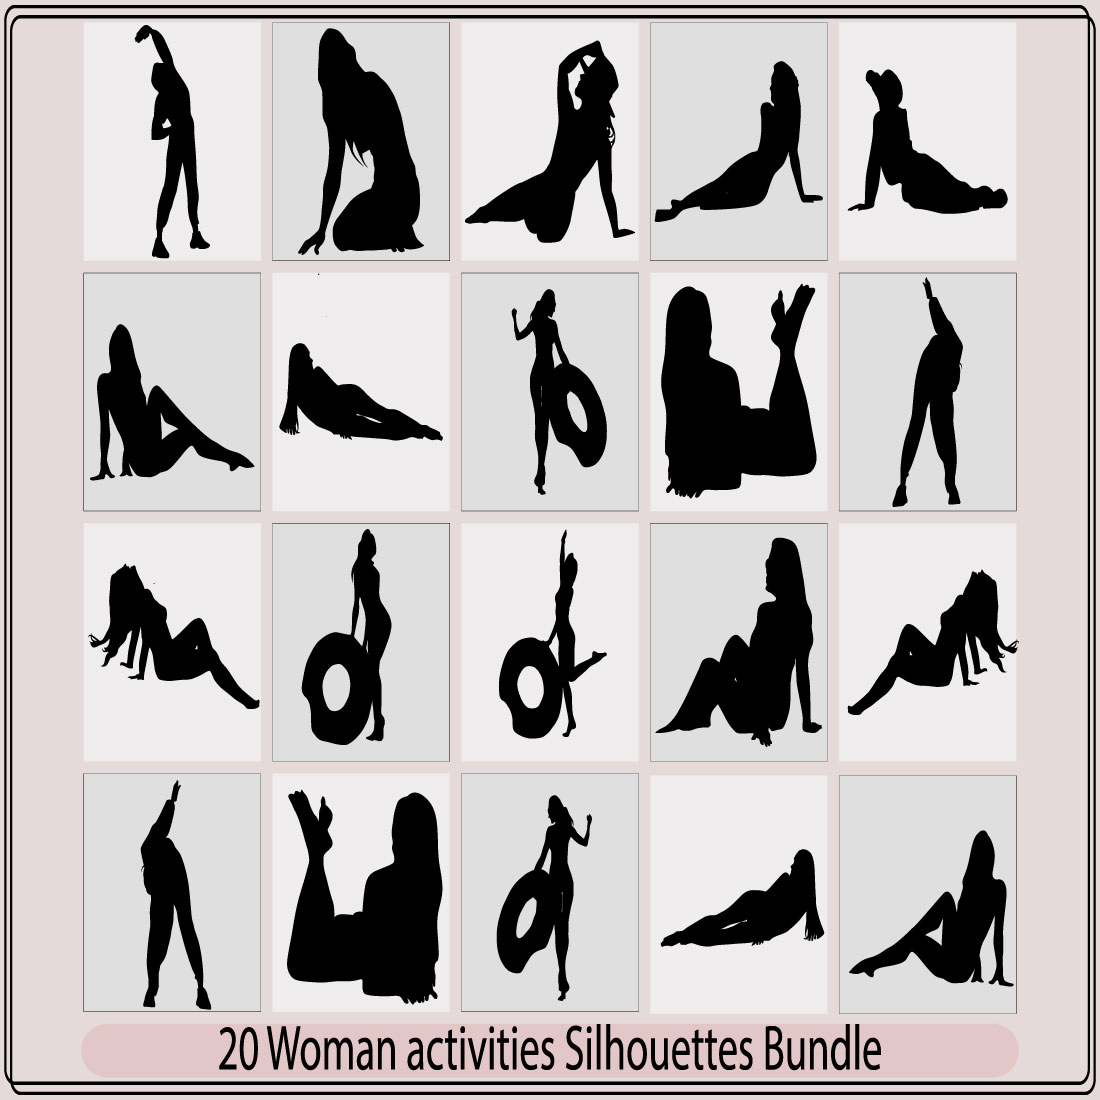 Set Of Silhouettes Of Dancing Couplessocial Dancing Silhouette Dancing Couplekizomba Dance